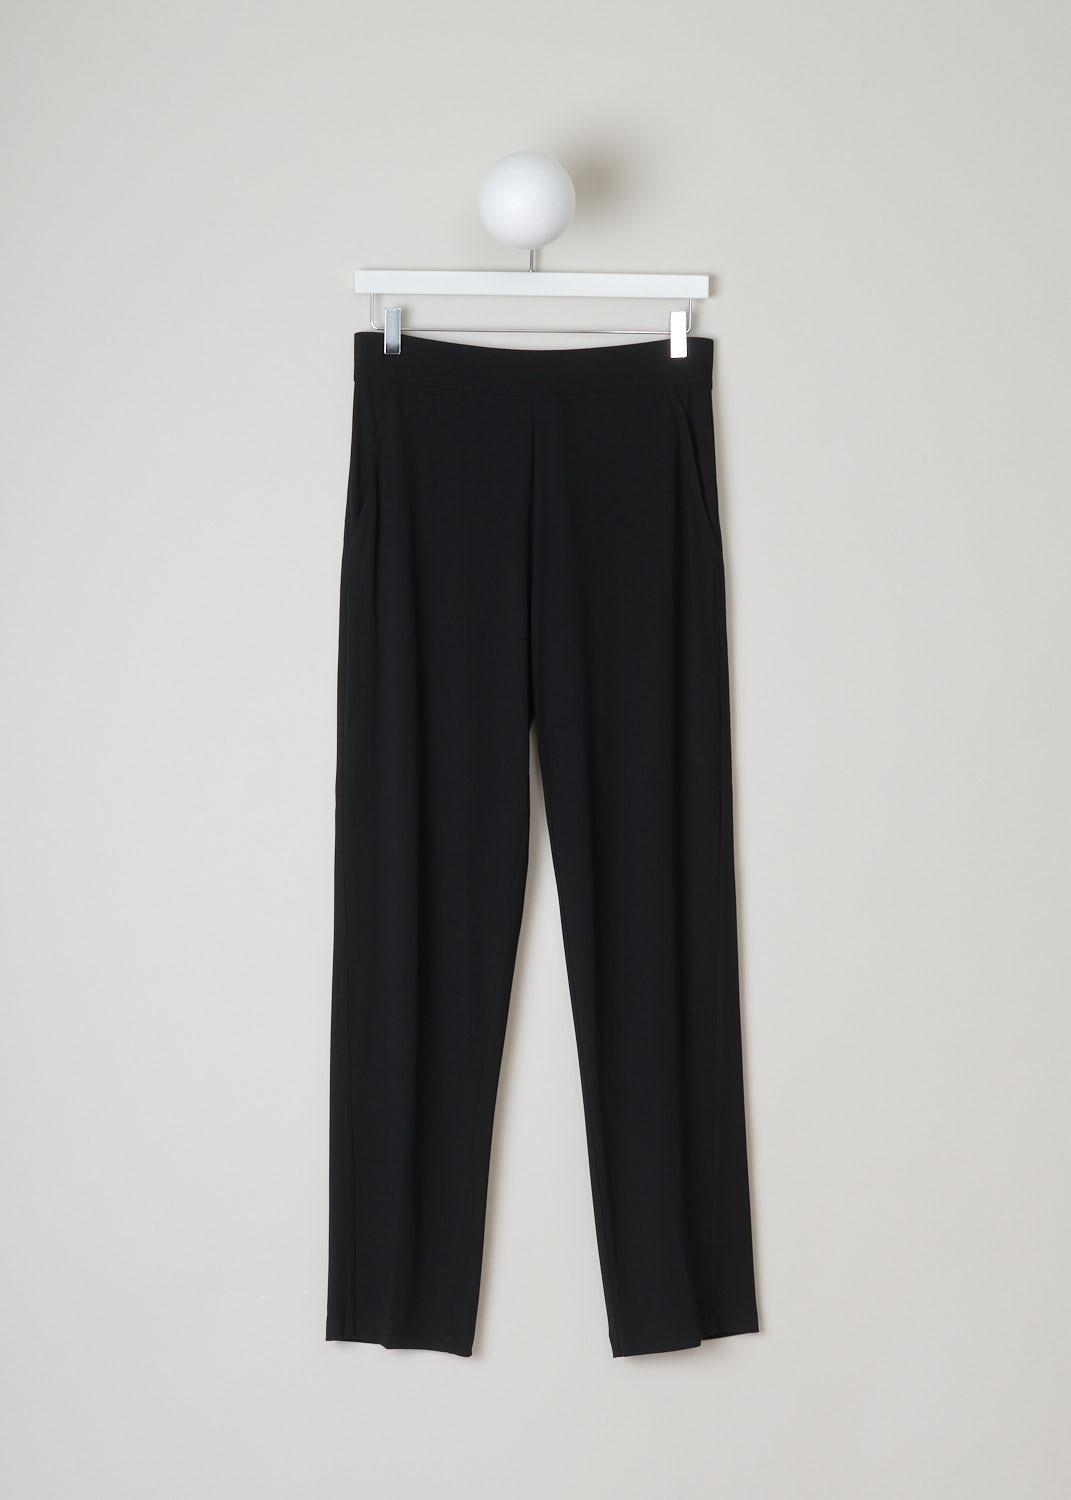 Donna Karan, Loose fit black stretch pants, A99P509J43_001_black, black, front, Comfy black pants, sits high and fitted on the waist, with a loose fit throughout the legs. Made from a thin airy fabric which contains a high stretch factor for that extra bit of comfort. Comes with forward slanted slip in pockets. No fastening option available on this model.  